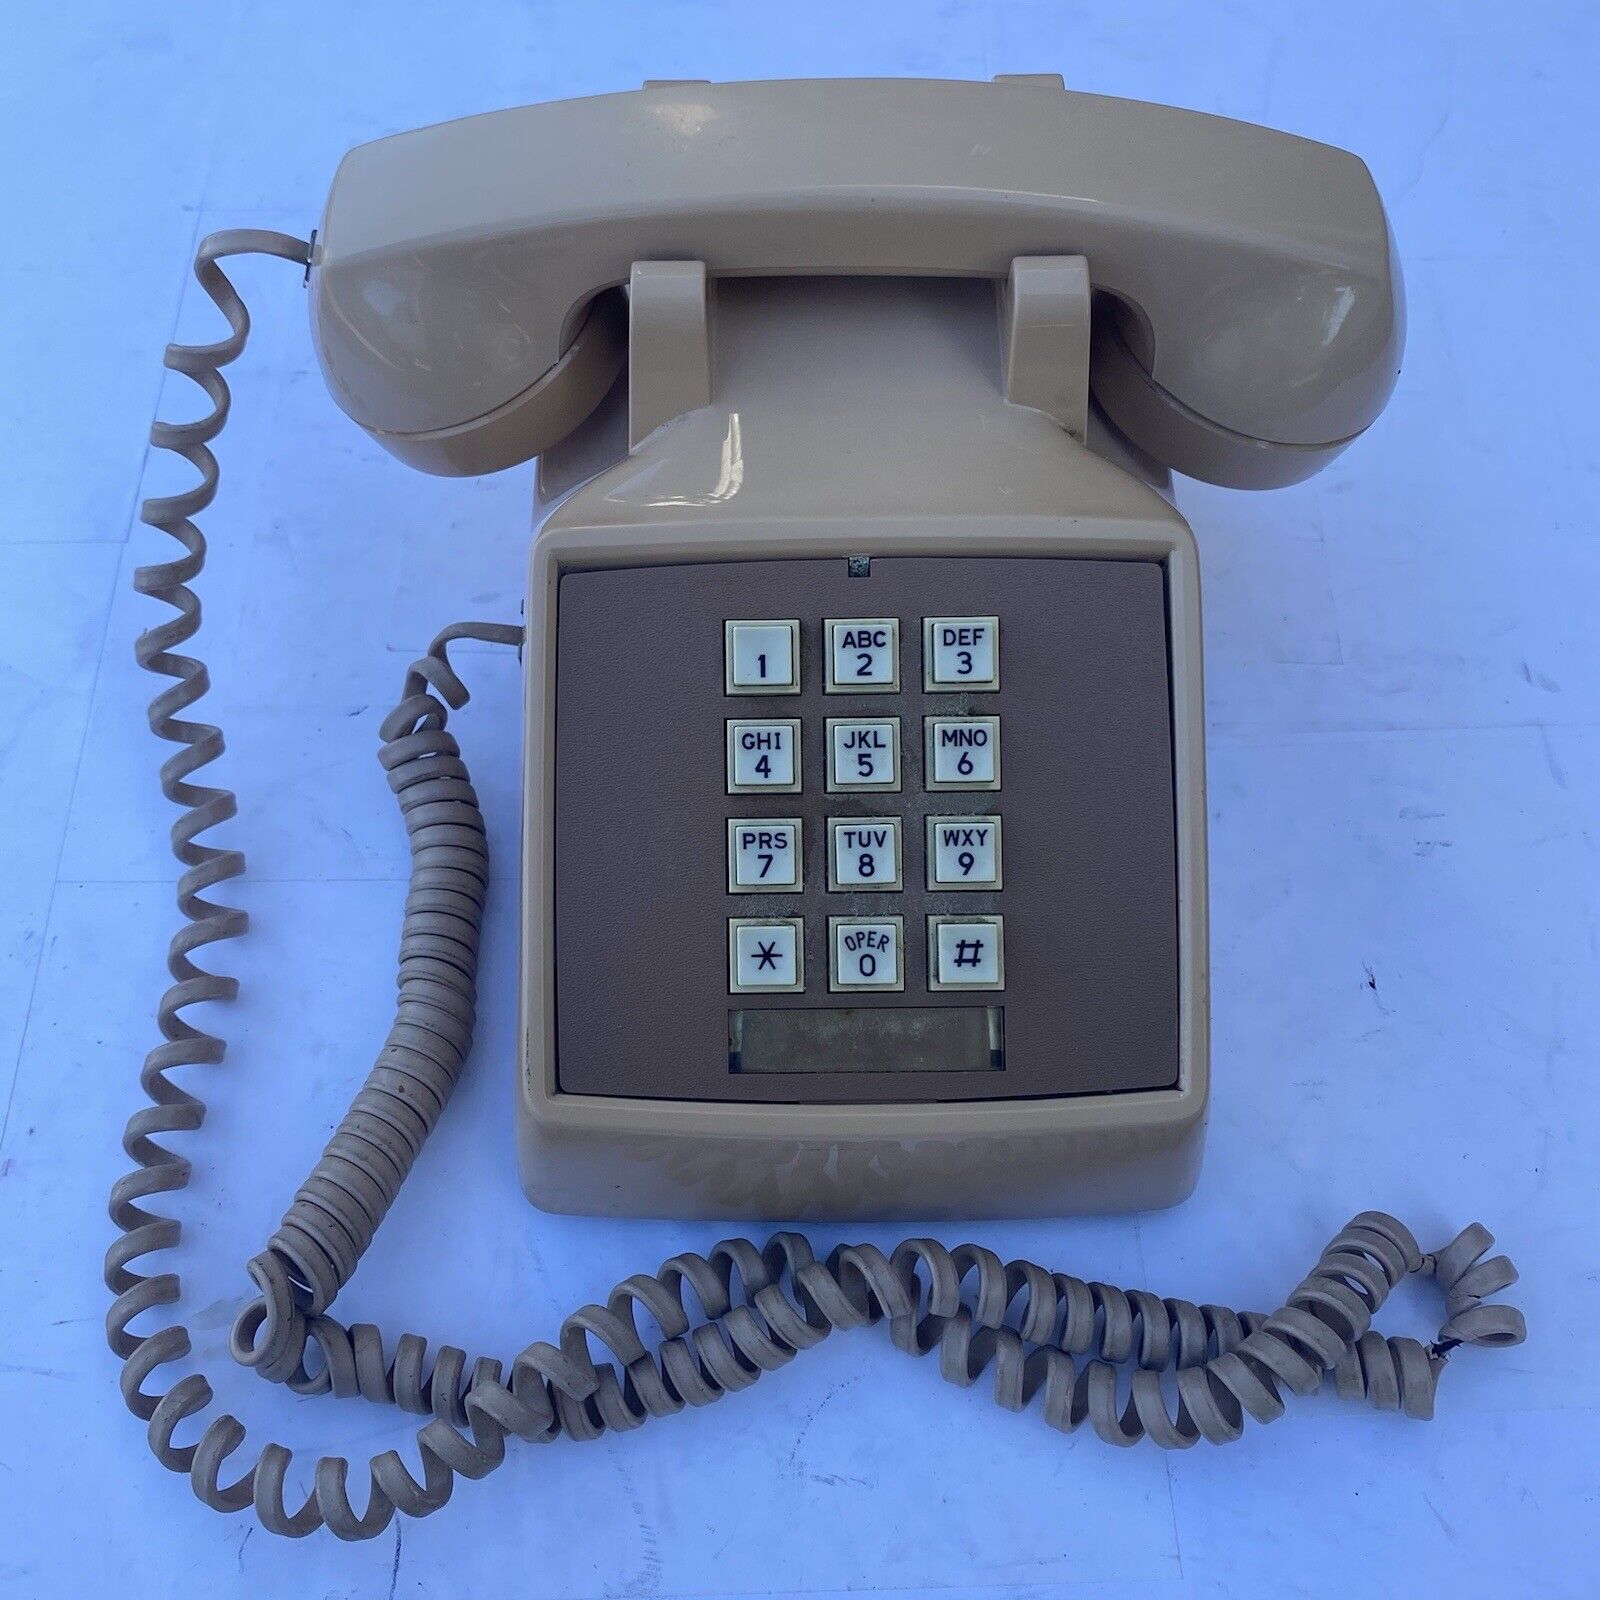 Vintage Comdial Push Button Desk Phone Beige And Brown Works  VGC Prop For Play